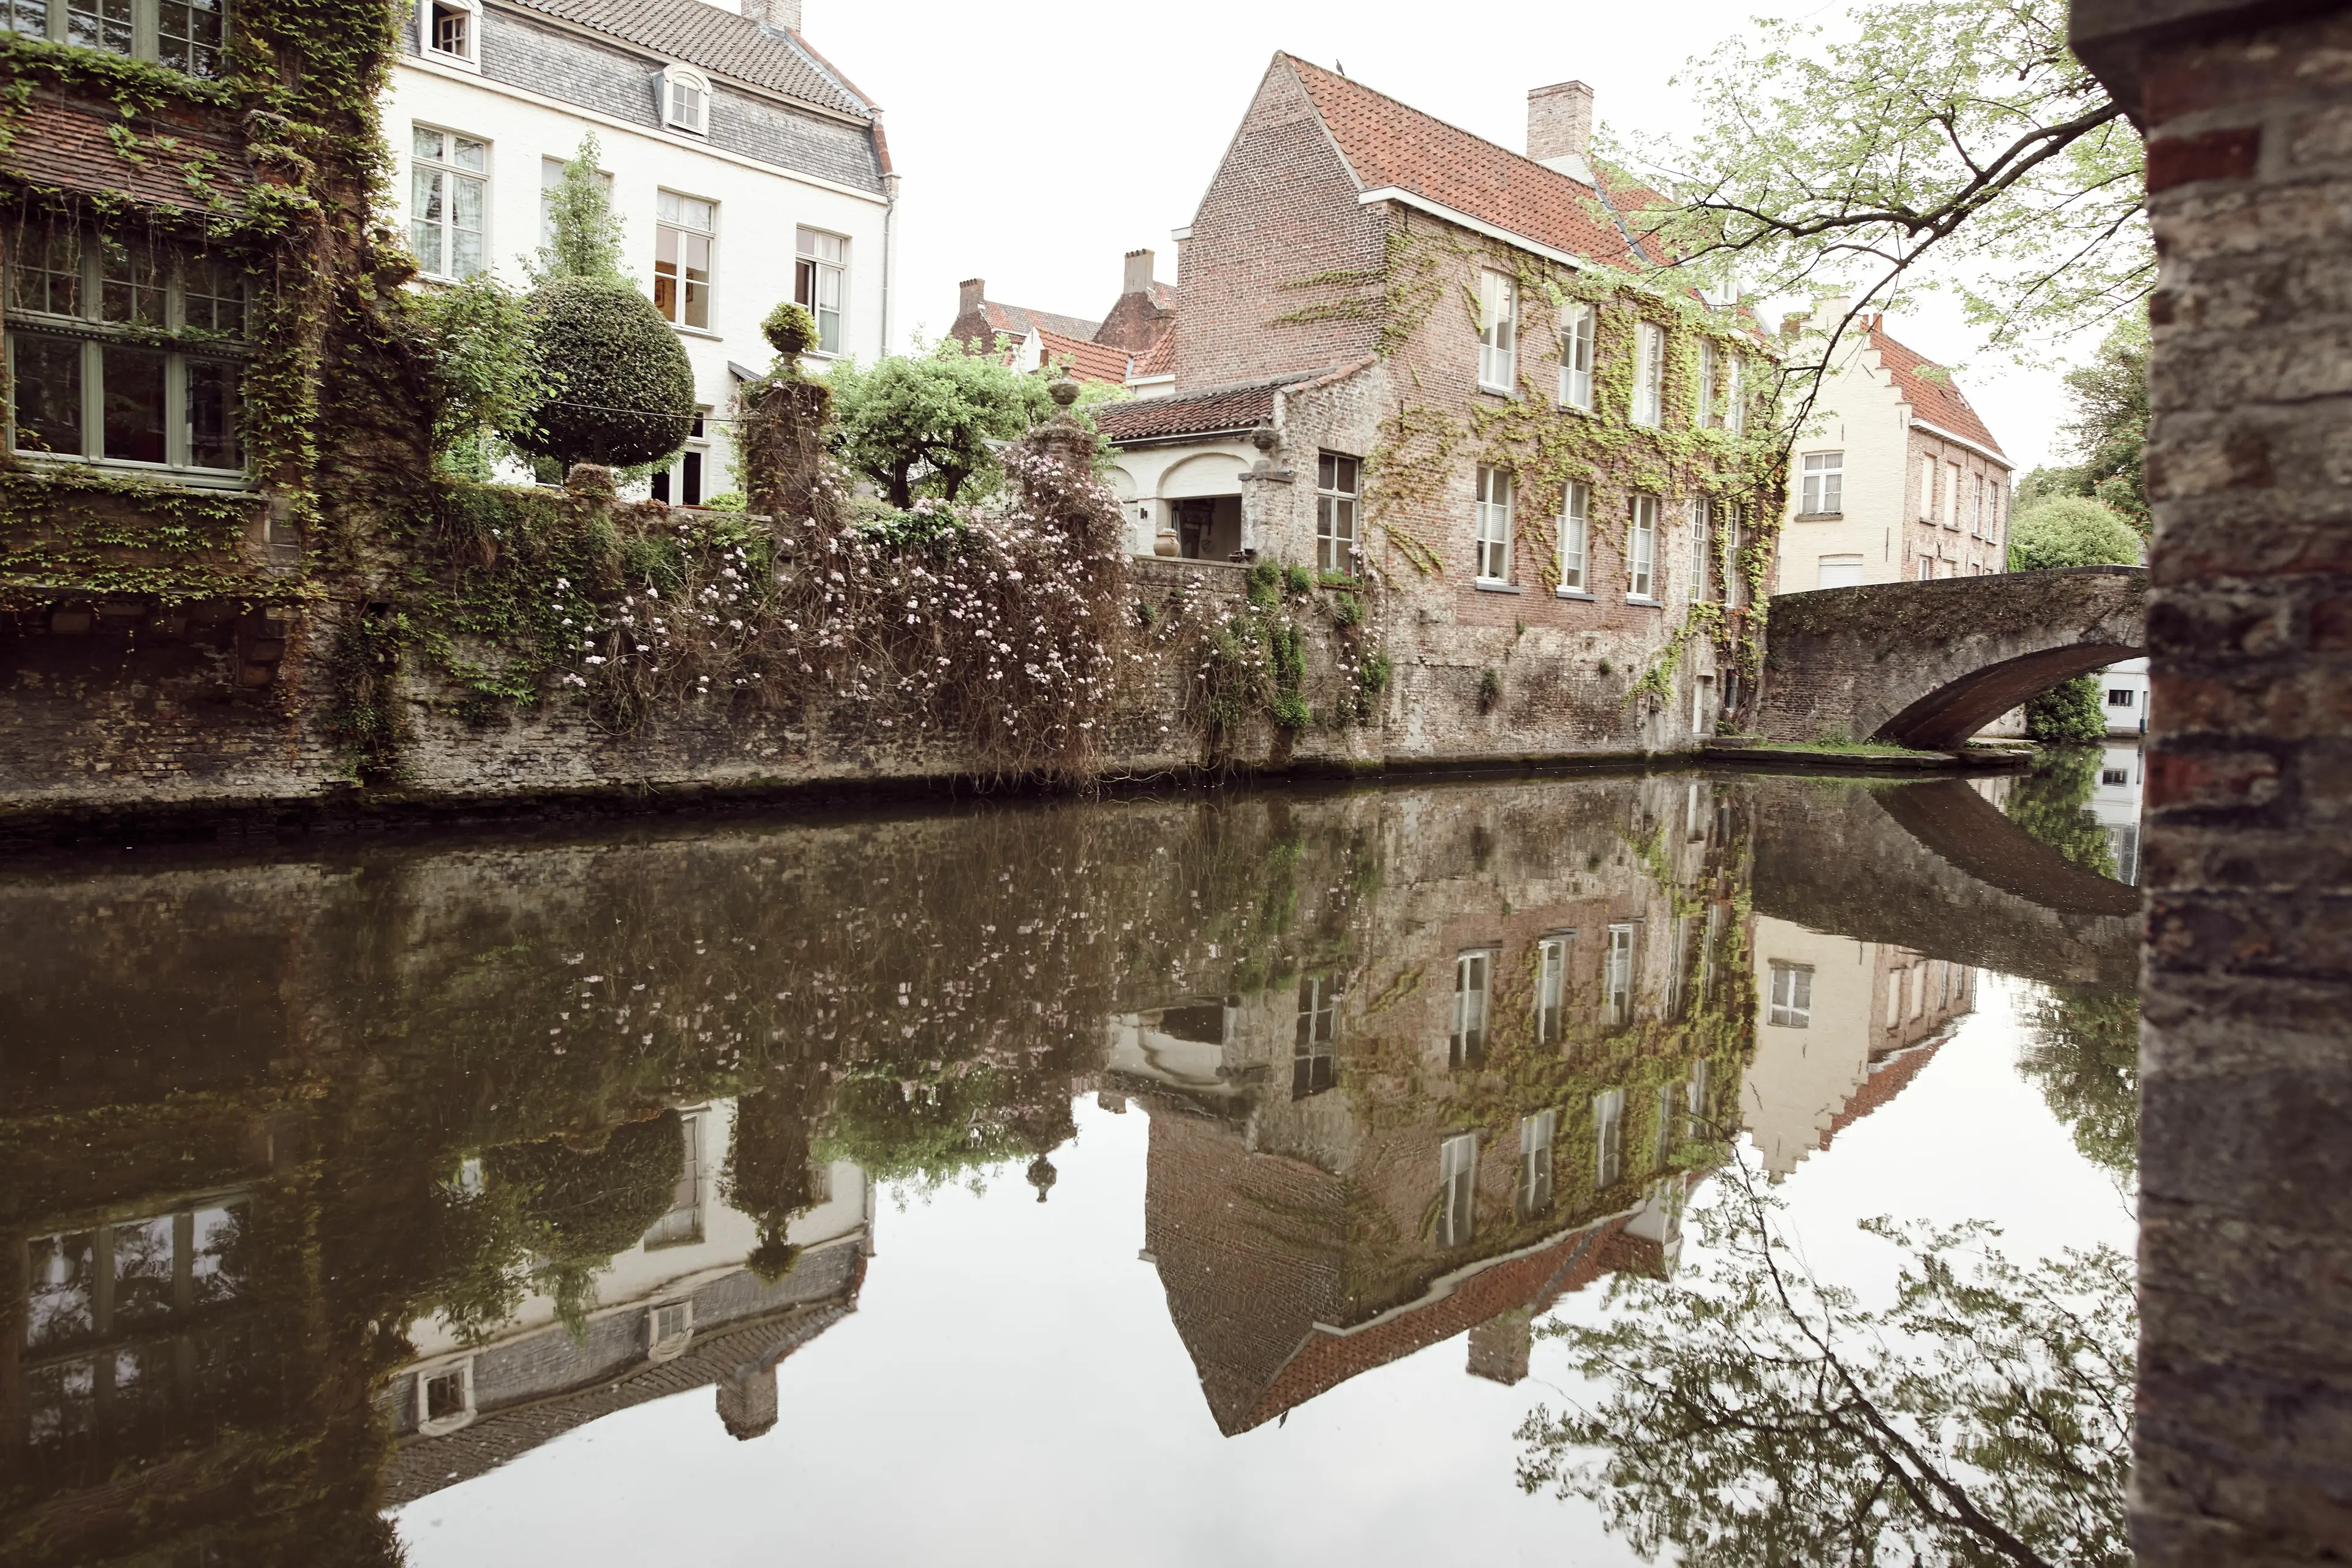 1-Day Adventure & Culinary Delights for Couples in Bruges, Belgium